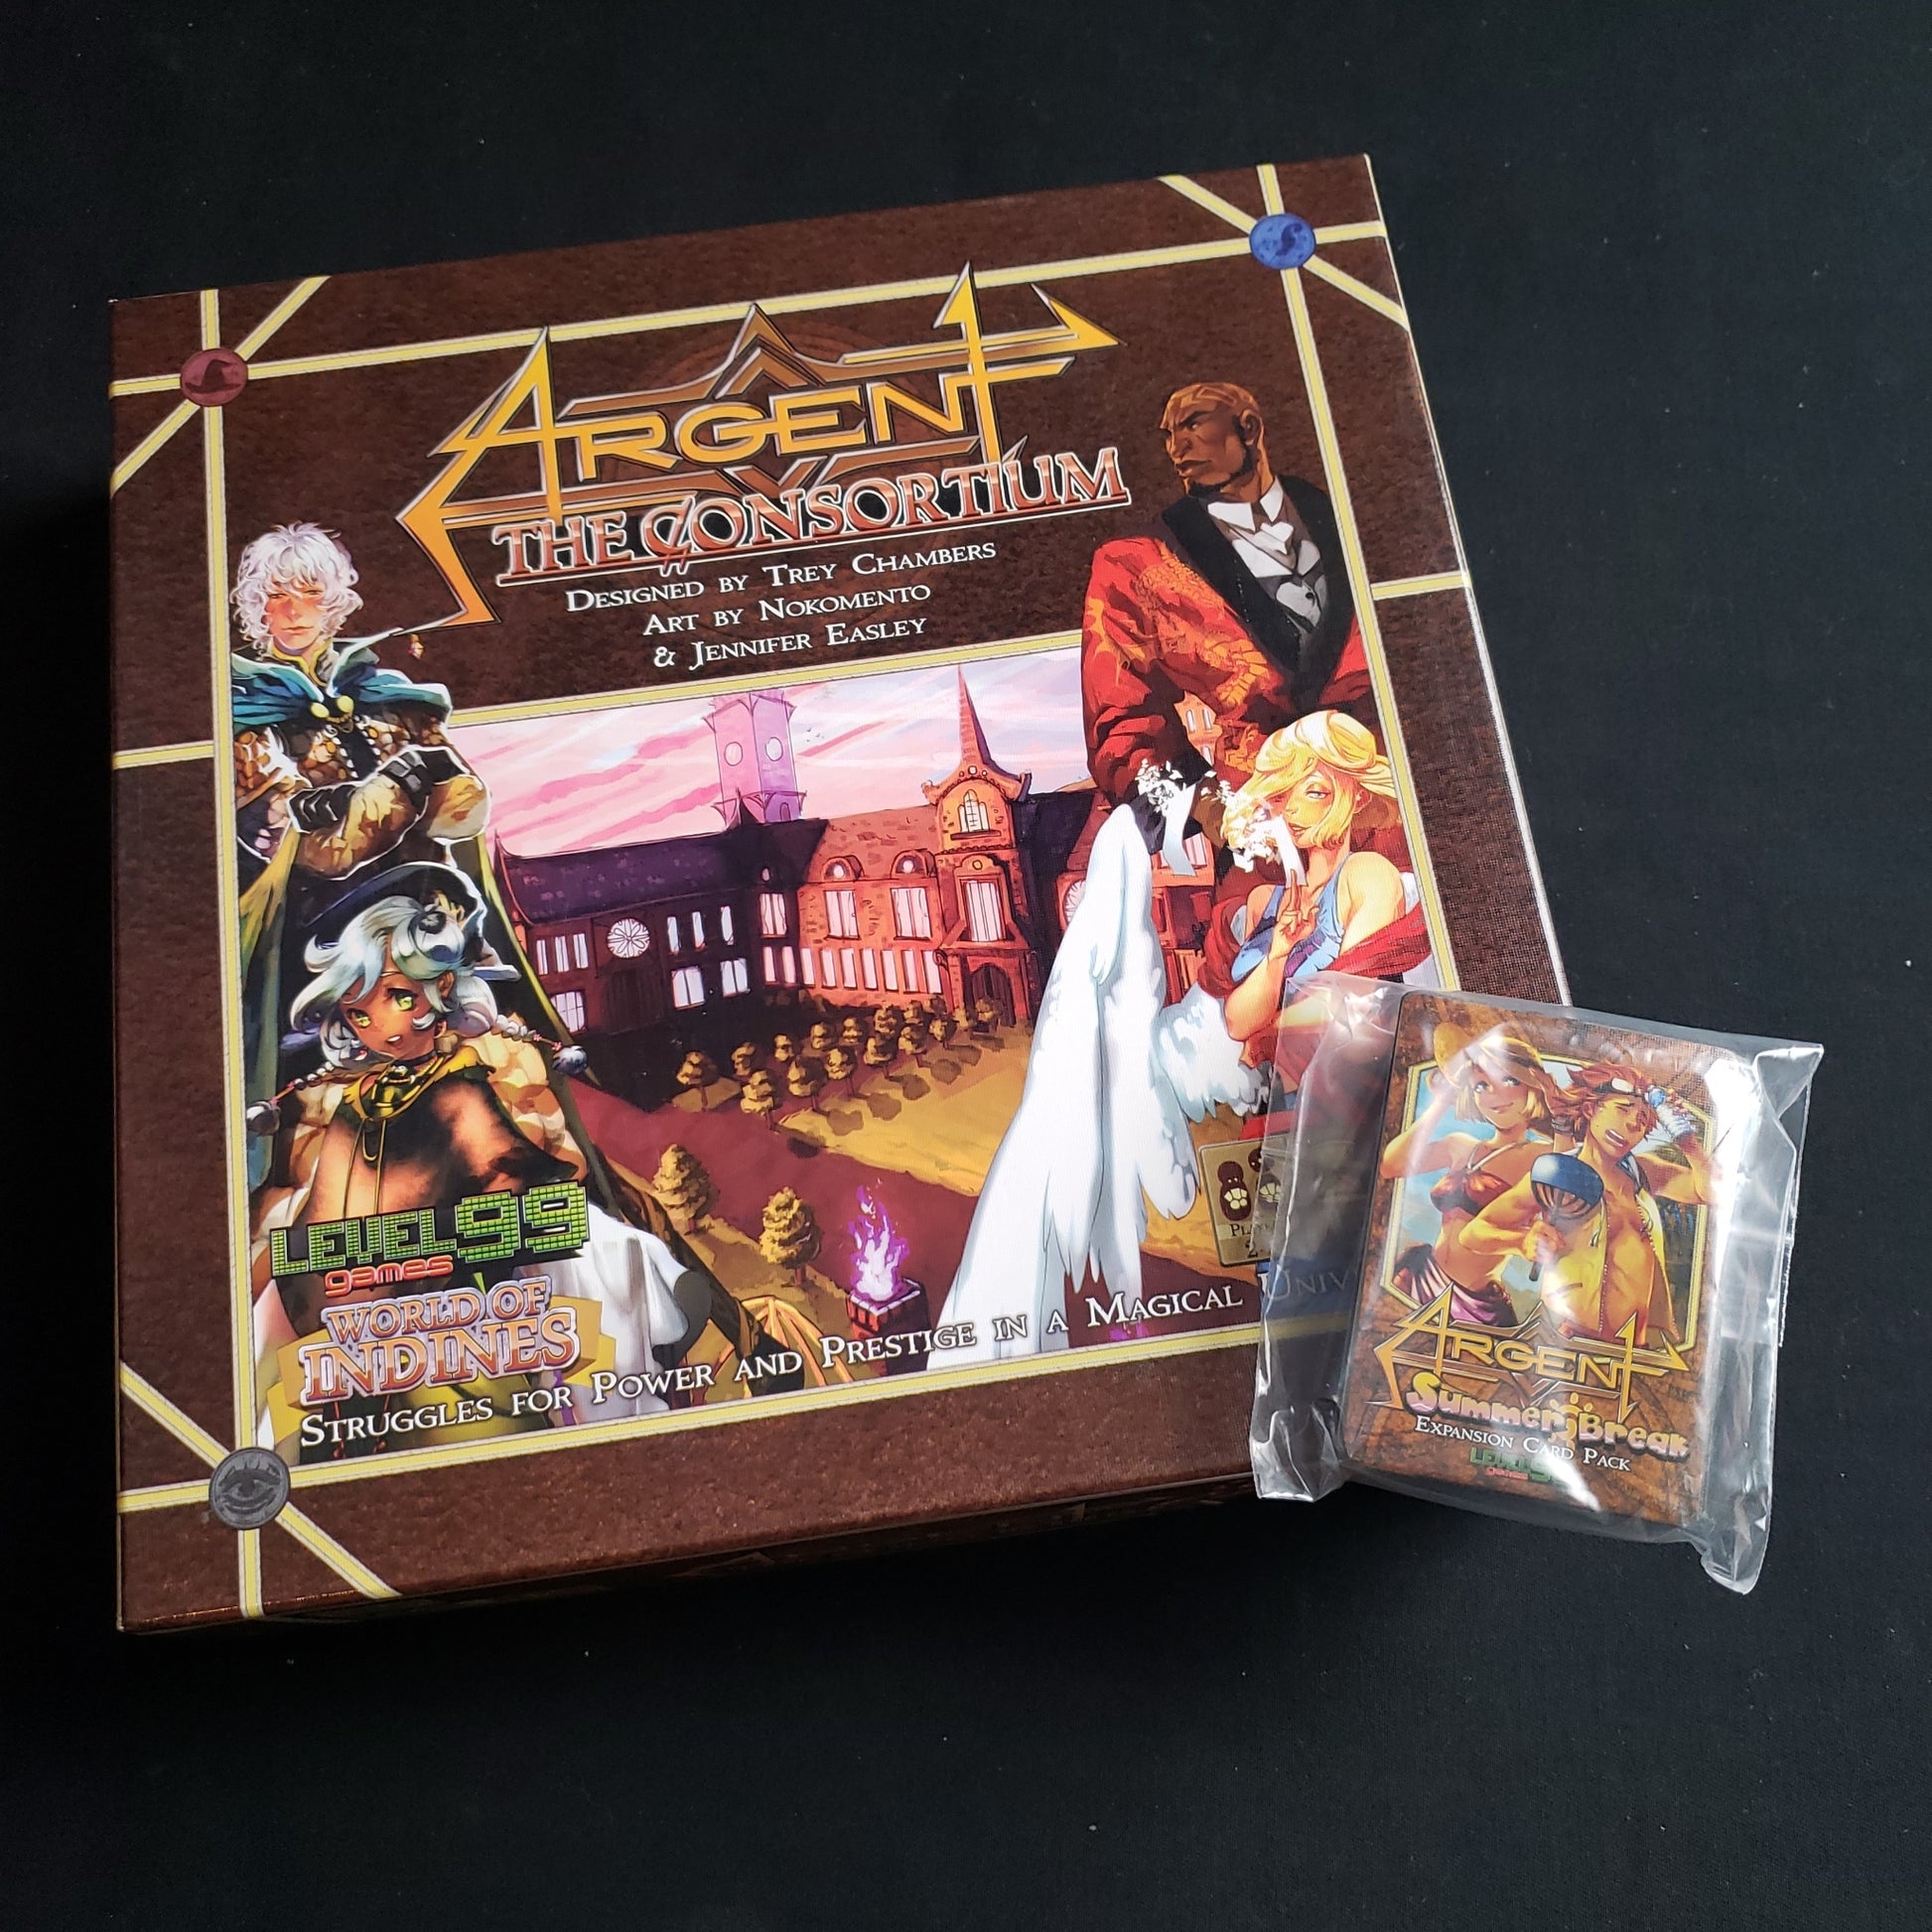 Image shows the front cover of the box of the Argent: The Consortium board game, with the Summer Break card expansion sitting on top of it